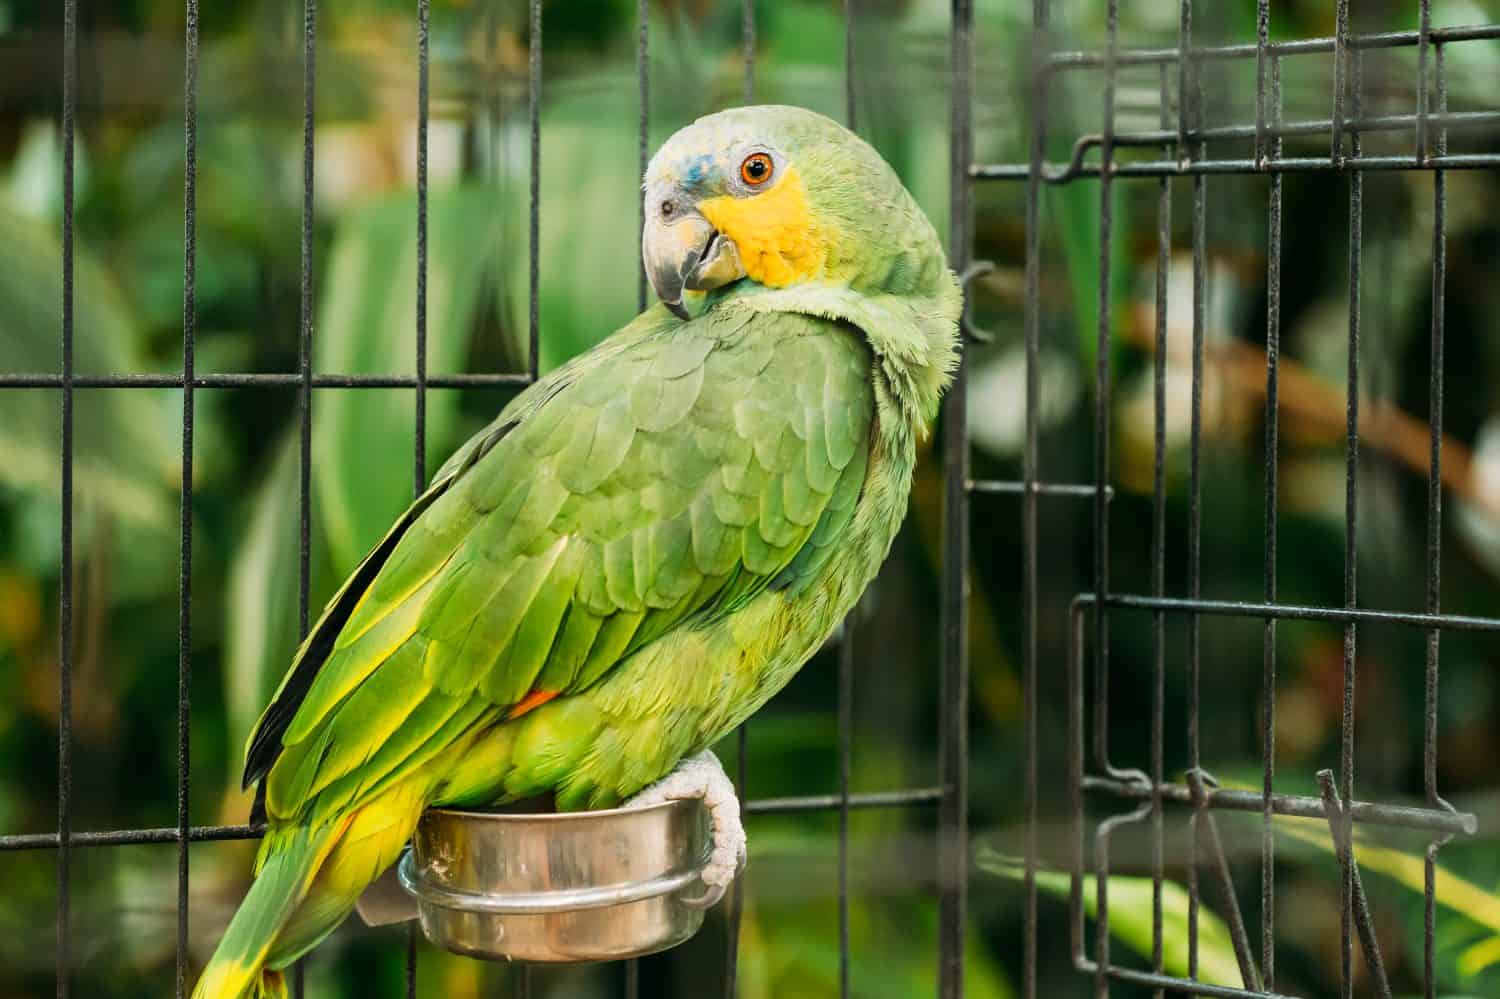 The Orange-winged Amazon Or Amazona Amazonica, Also Known Locally As Orange-winged Parrot And Loro Guaro, Is A Large Amazon Parrot. Wild Bird In Cage.